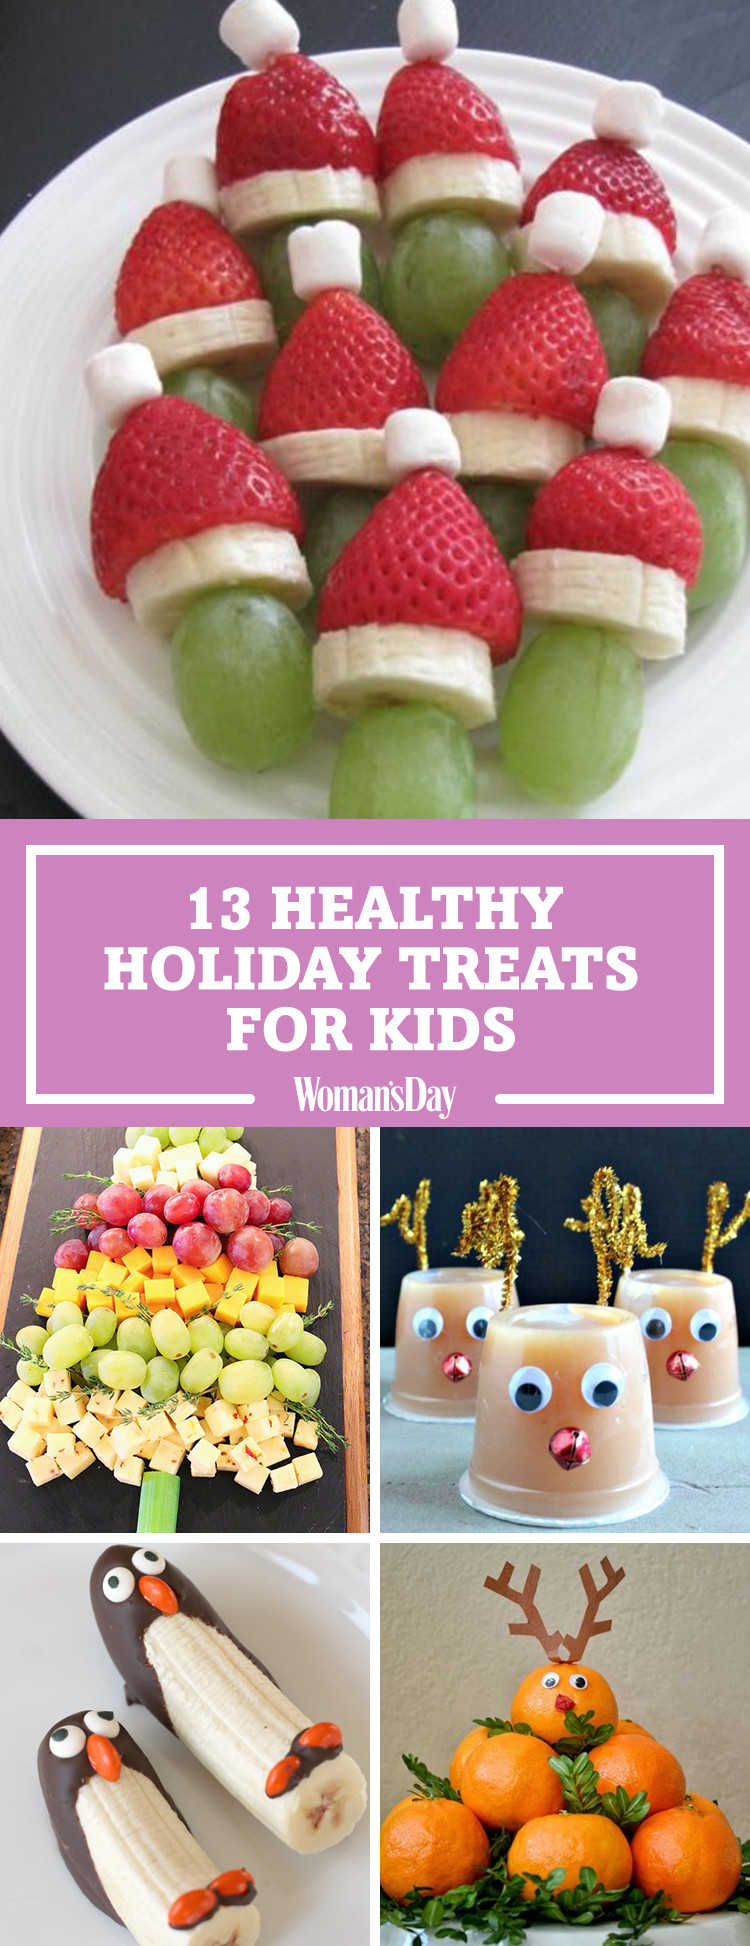 Cheap Healthy Snacks For Kids
 17 Healthy Christmas Snacks for Kids Easy Ideas for